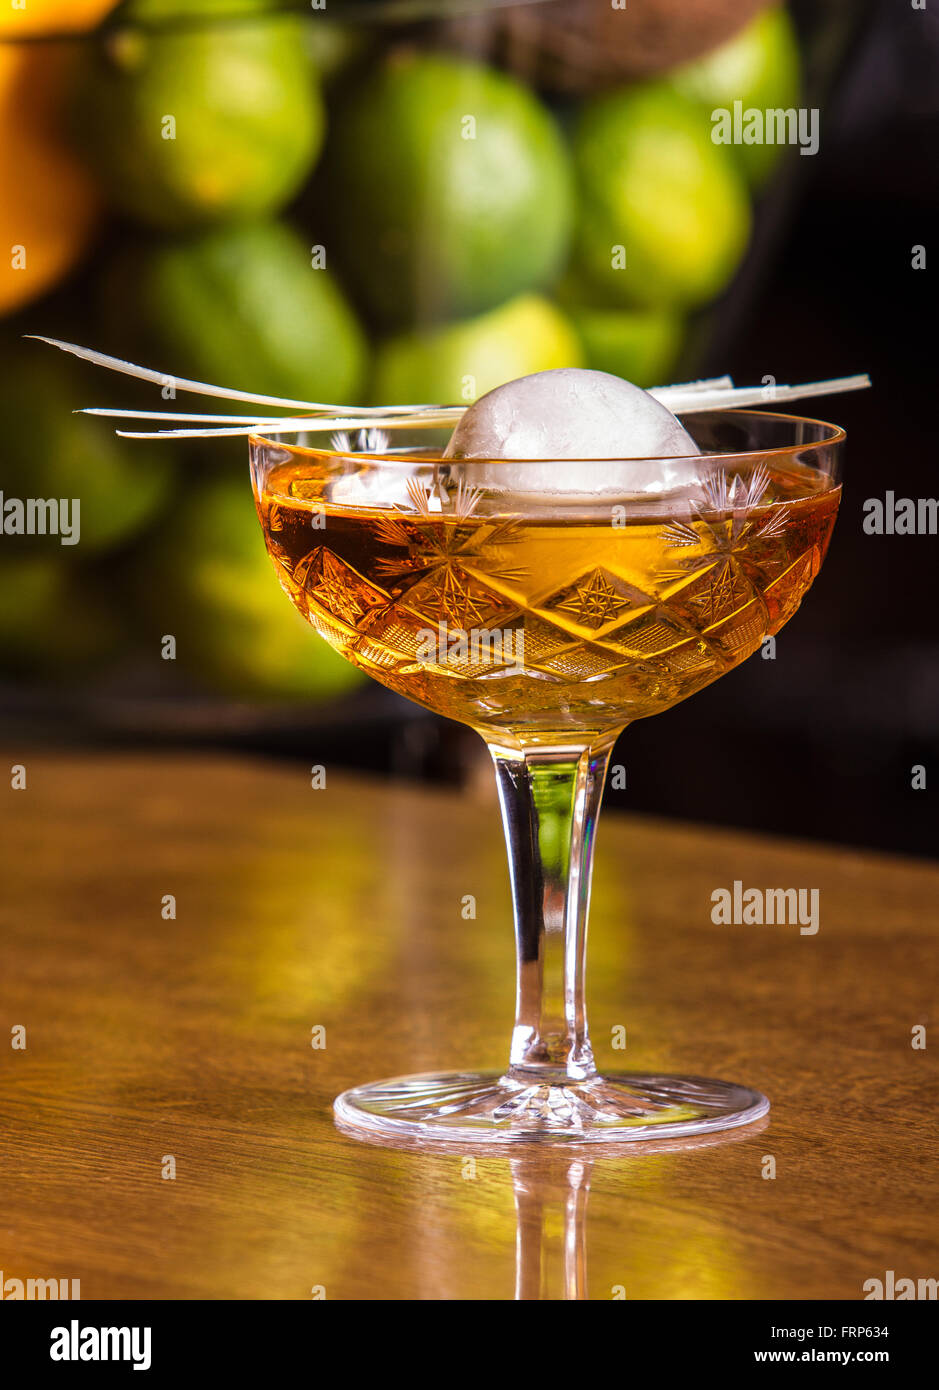 https://c8.alamy.com/comp/FRP634/alcoholic-beverage-based-on-bar-counter-with-balls-ice-cubes-FRP634.jpg